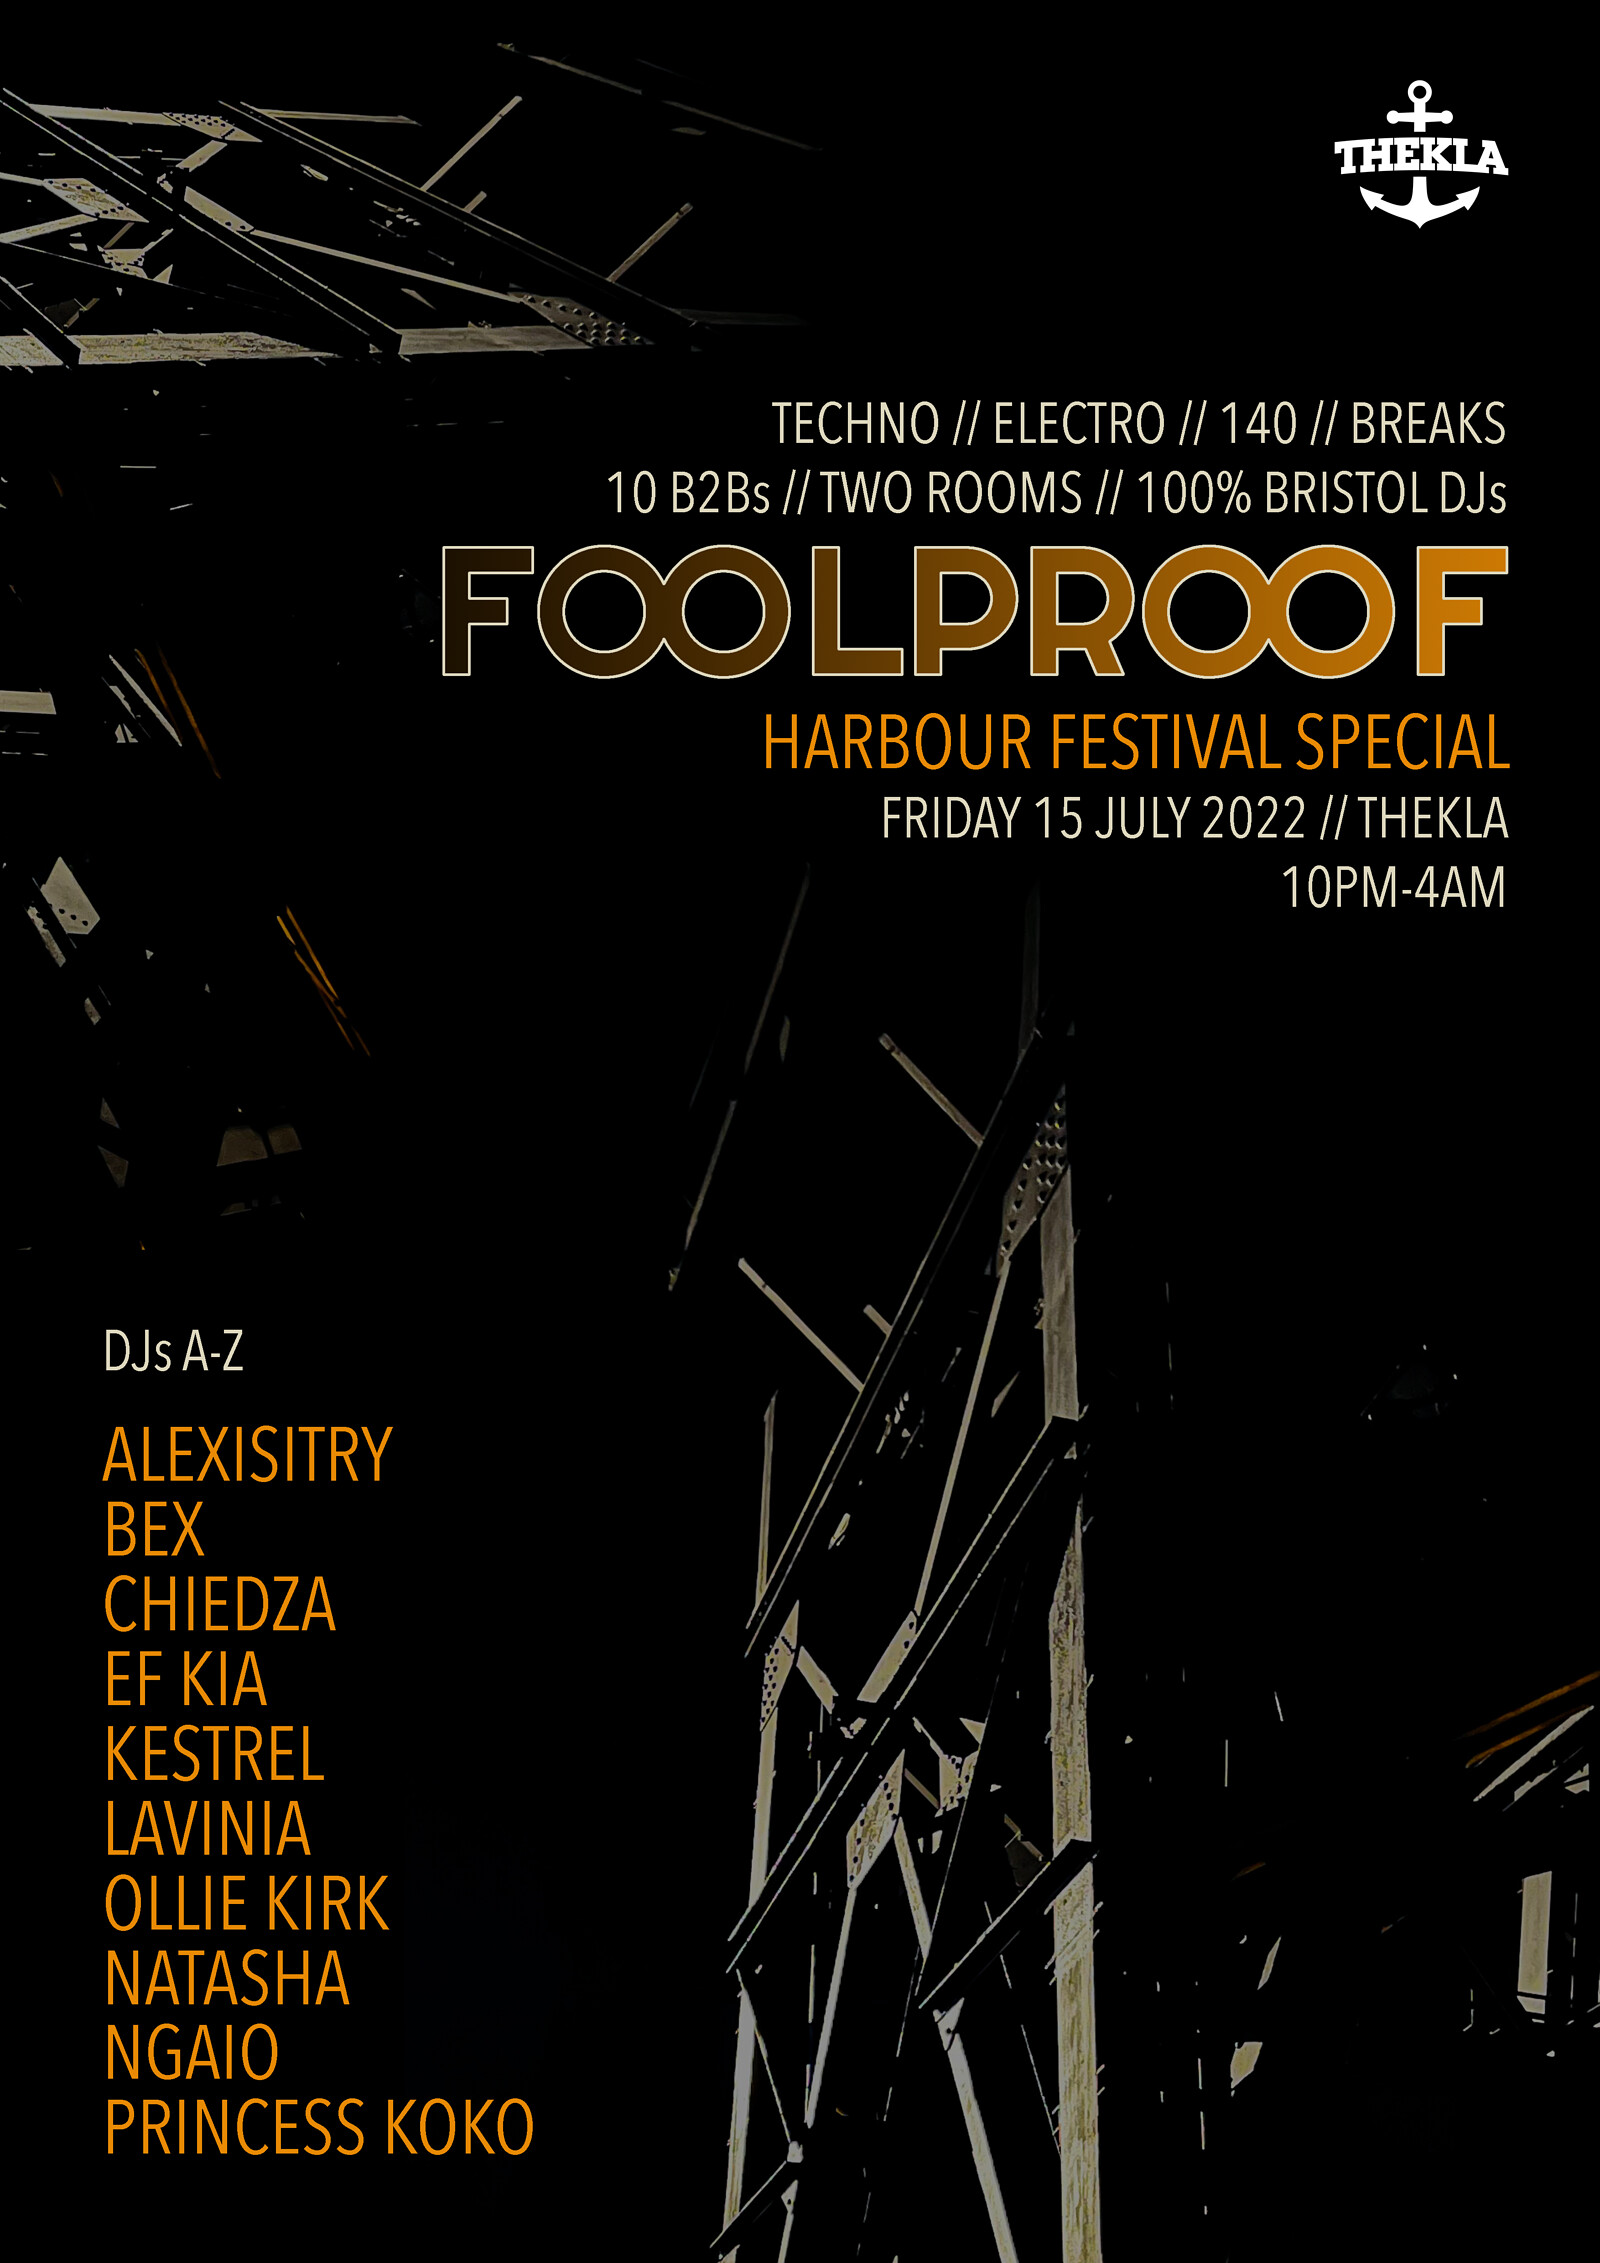 FOOLPROOF - House / Garage / Techno / 140 / Breaks at Thekla